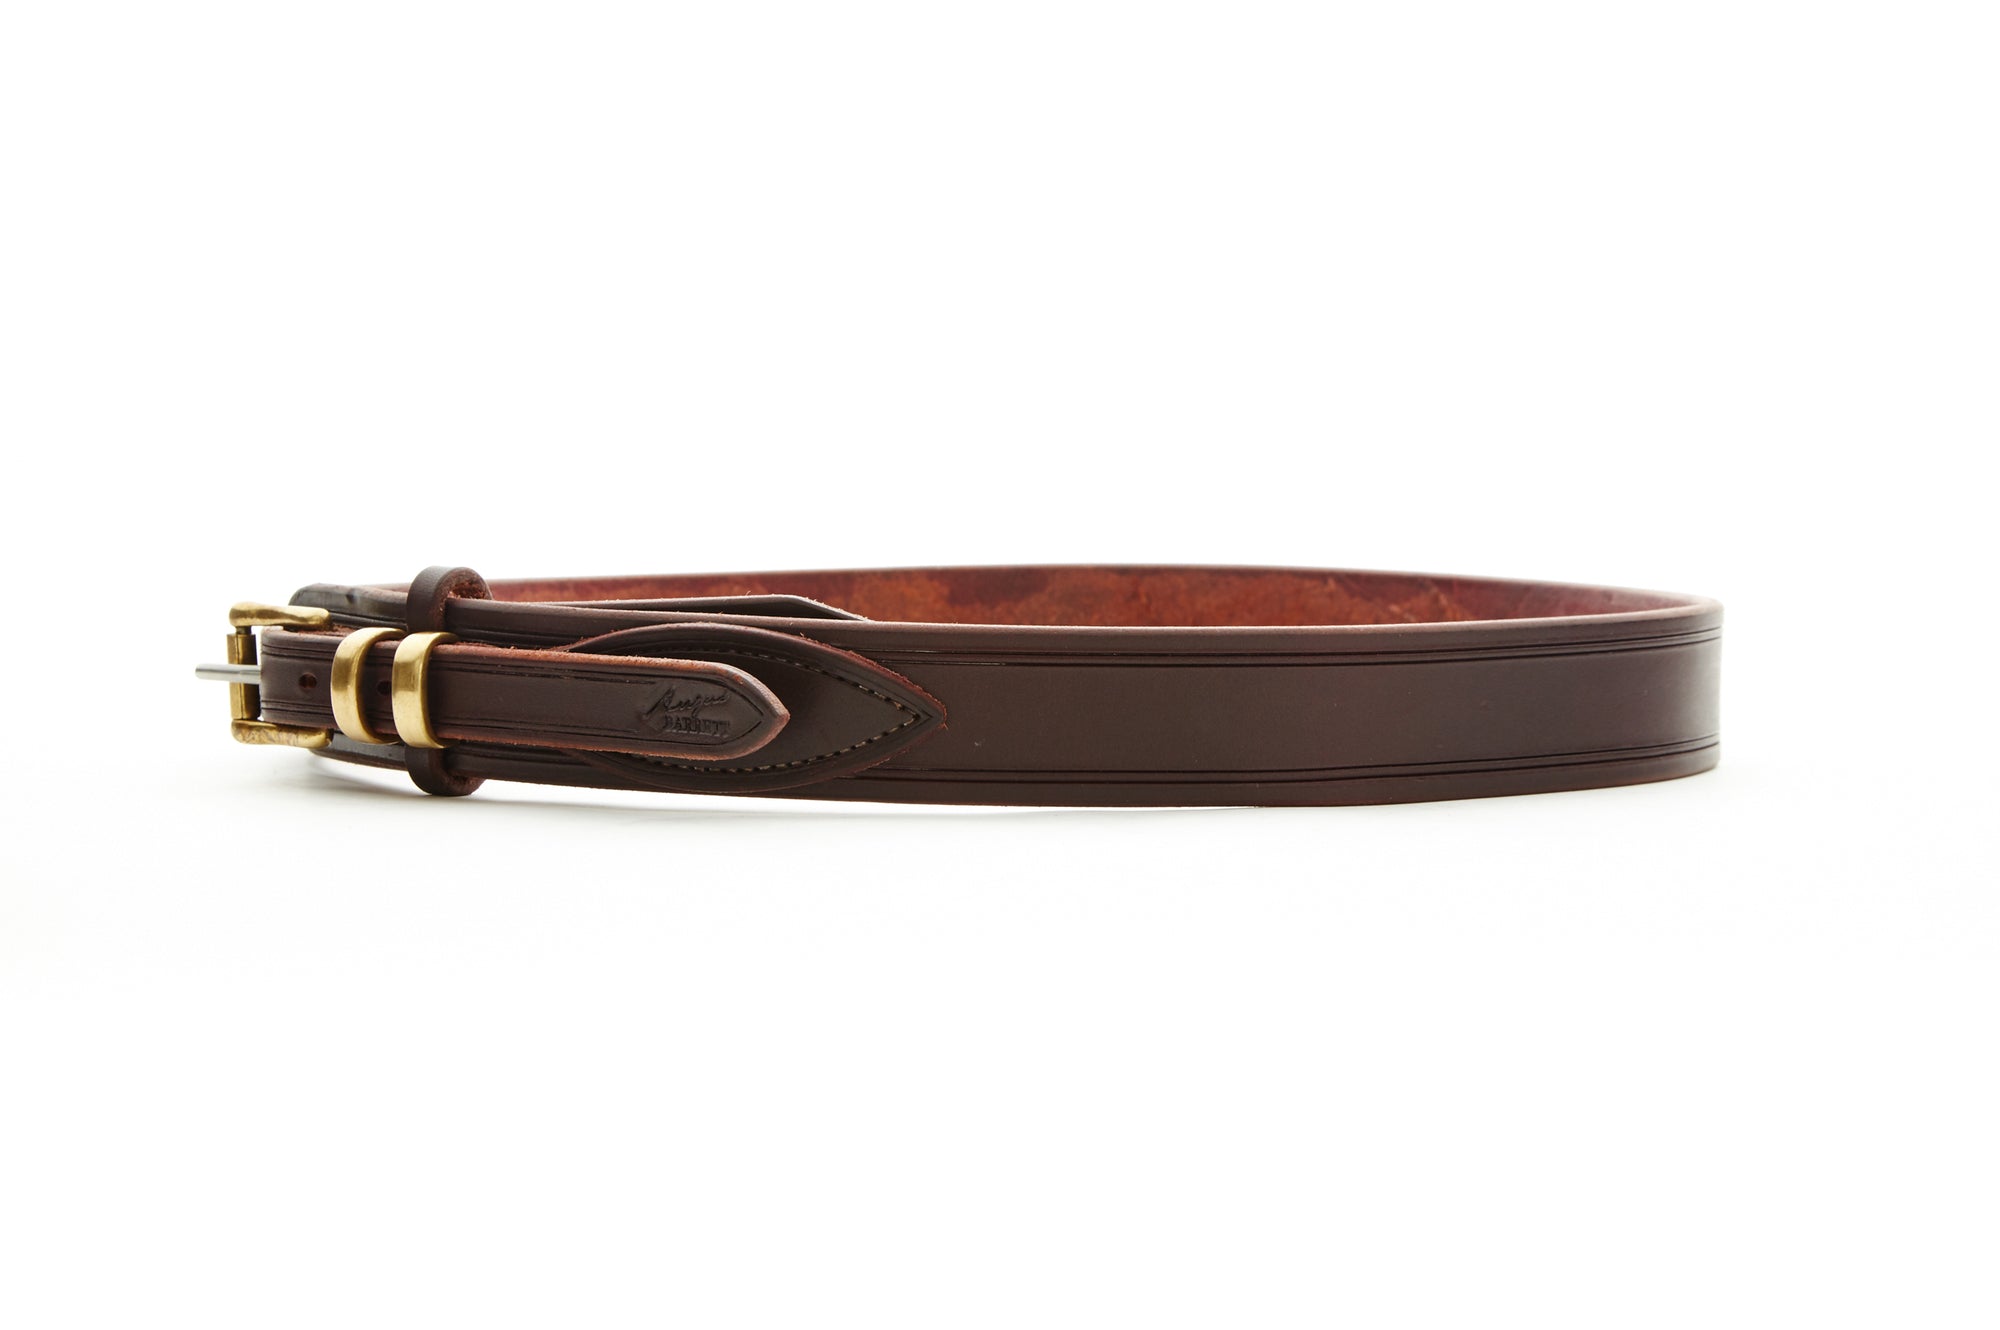 Angus Barrett Drovers Belt with sold Brass hardware